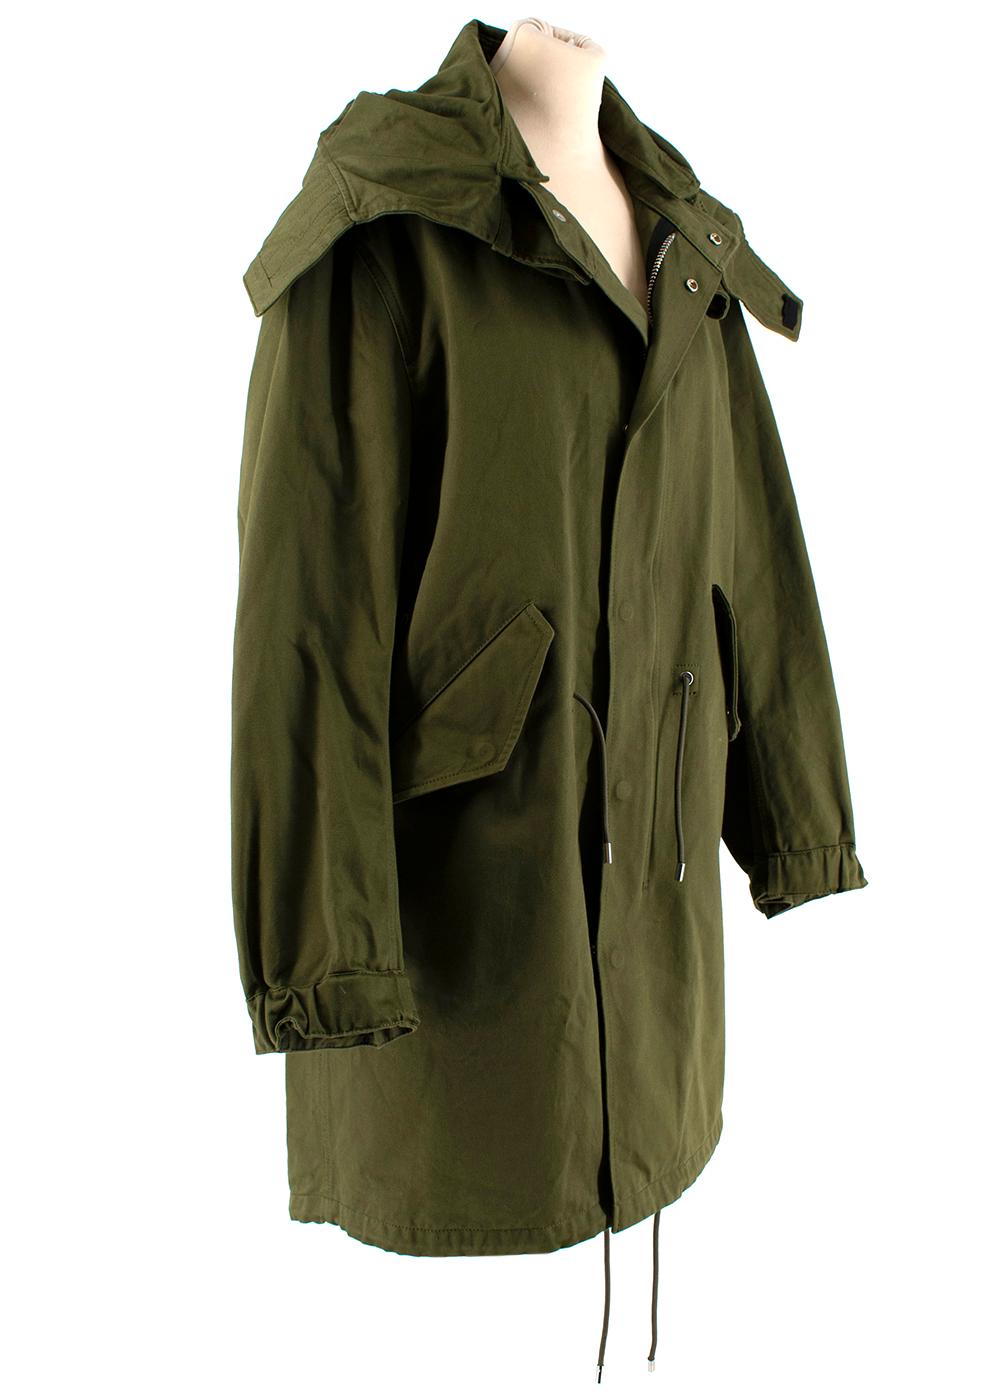 Givenchy Green Cotton Wings Print Parka Coat

- Made of soft Cotton 
- Gorgeous wings print to the back 
- Leather details
- Pockets to the front 
- Gorgeous green hue 
- Elasticated buttoned cuffs 
- Adjustable string fastening to the waist 
-